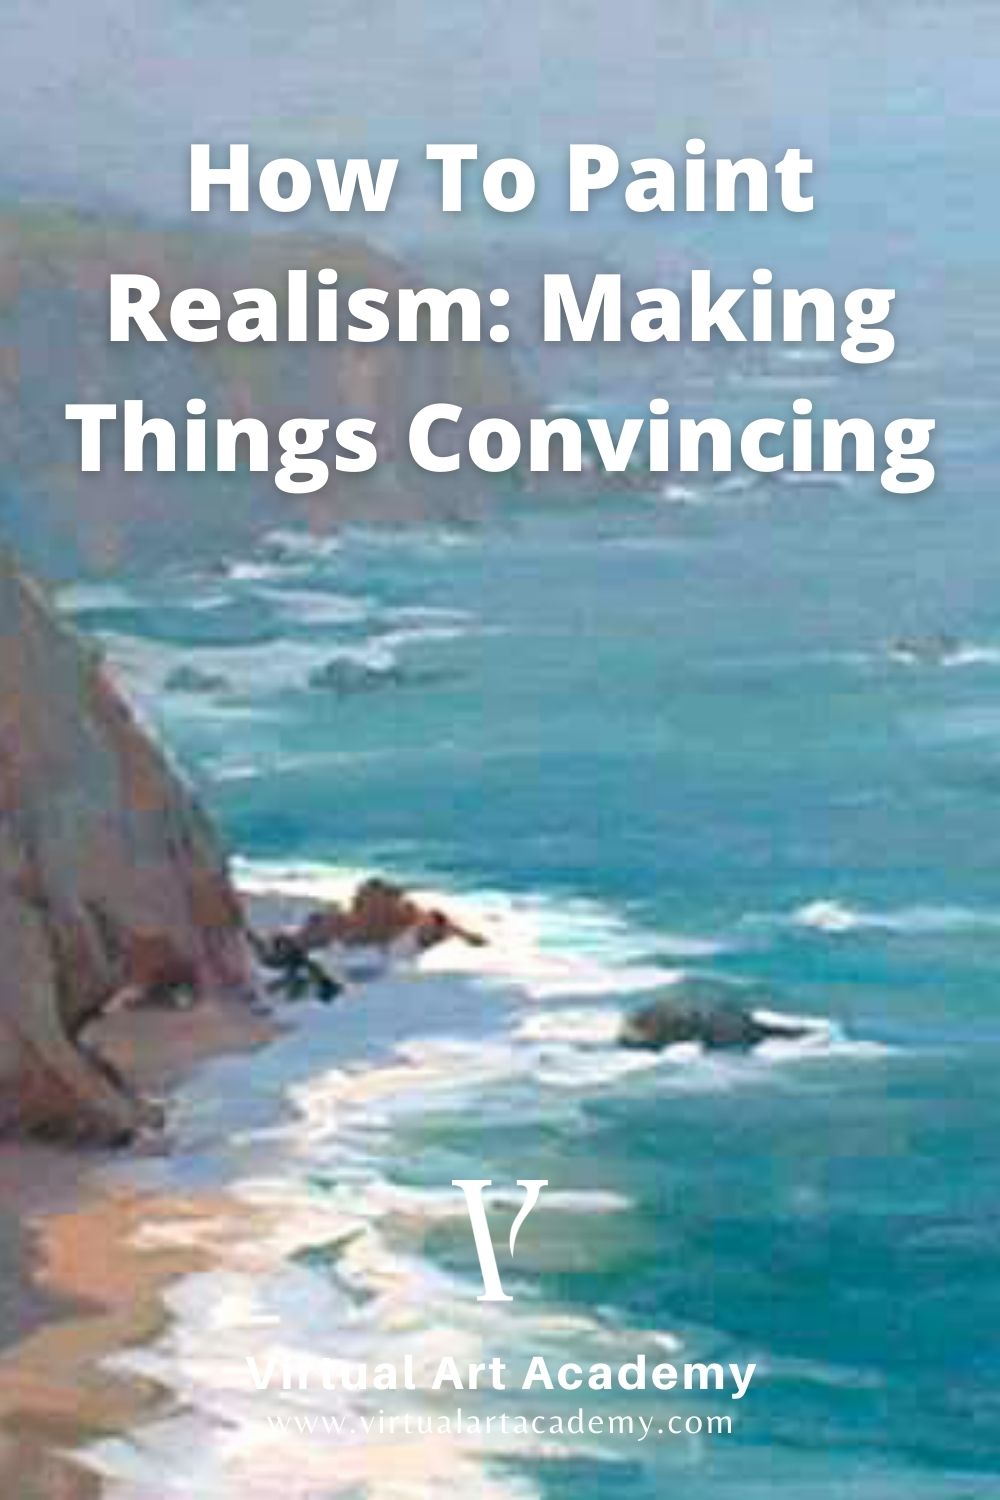 How To Paint Realism: Making Things Convincing